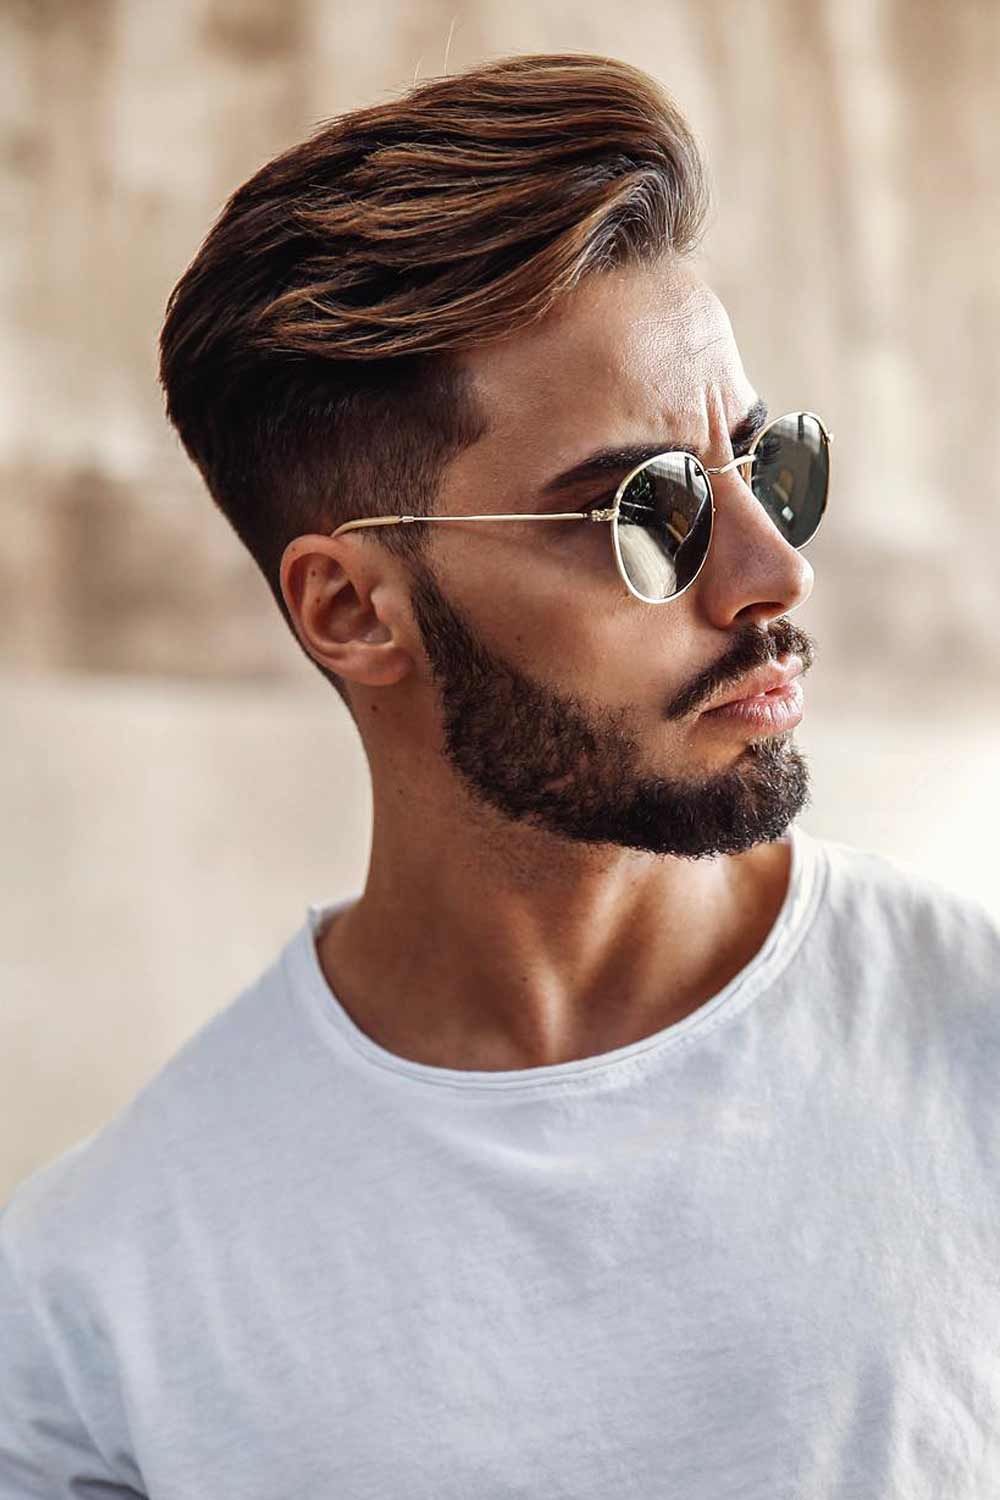 Our Top 10 Hairstyles For Men Who Wear Glasses